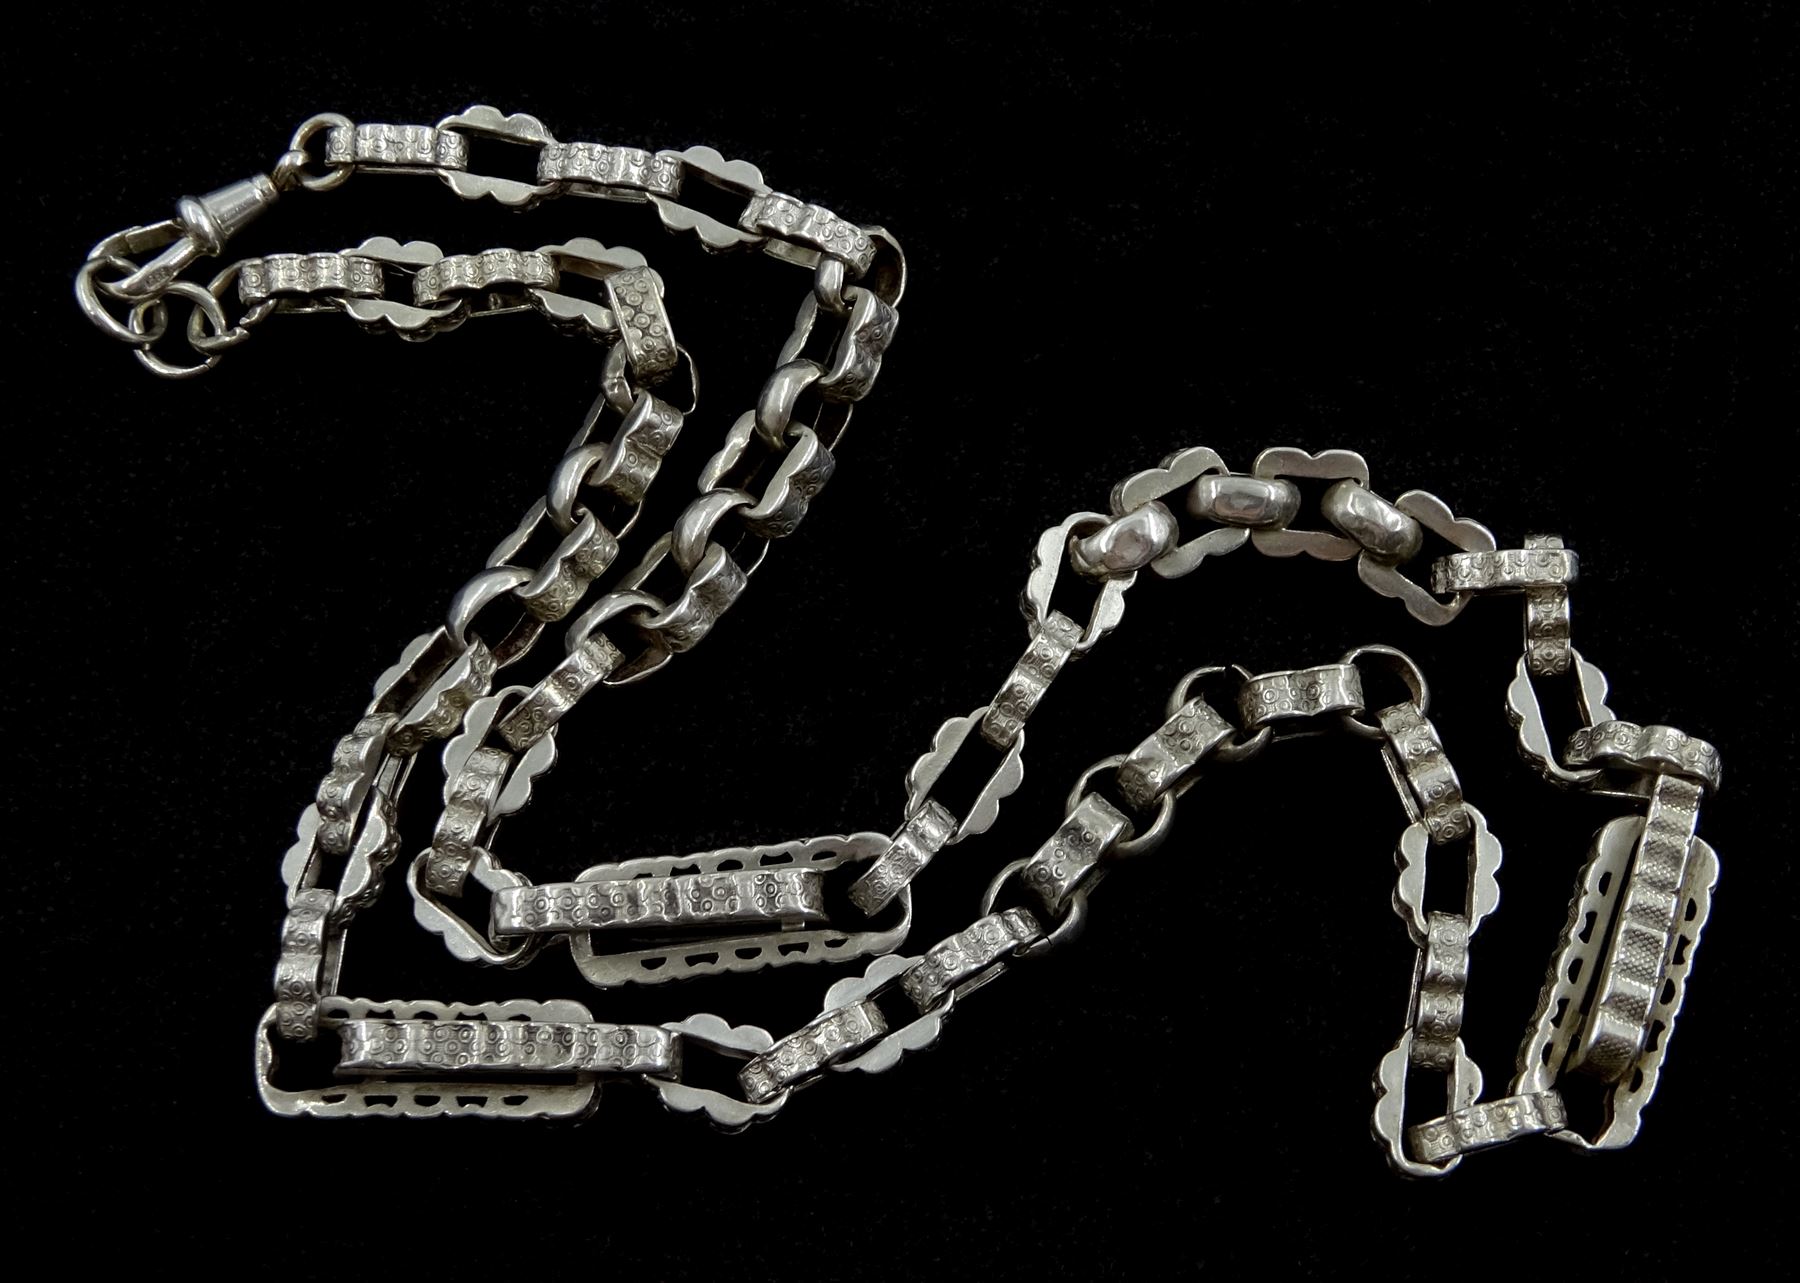 Victorian silver fancy link watch chain with engraved decoration and later spring loaded clip - Image 2 of 2